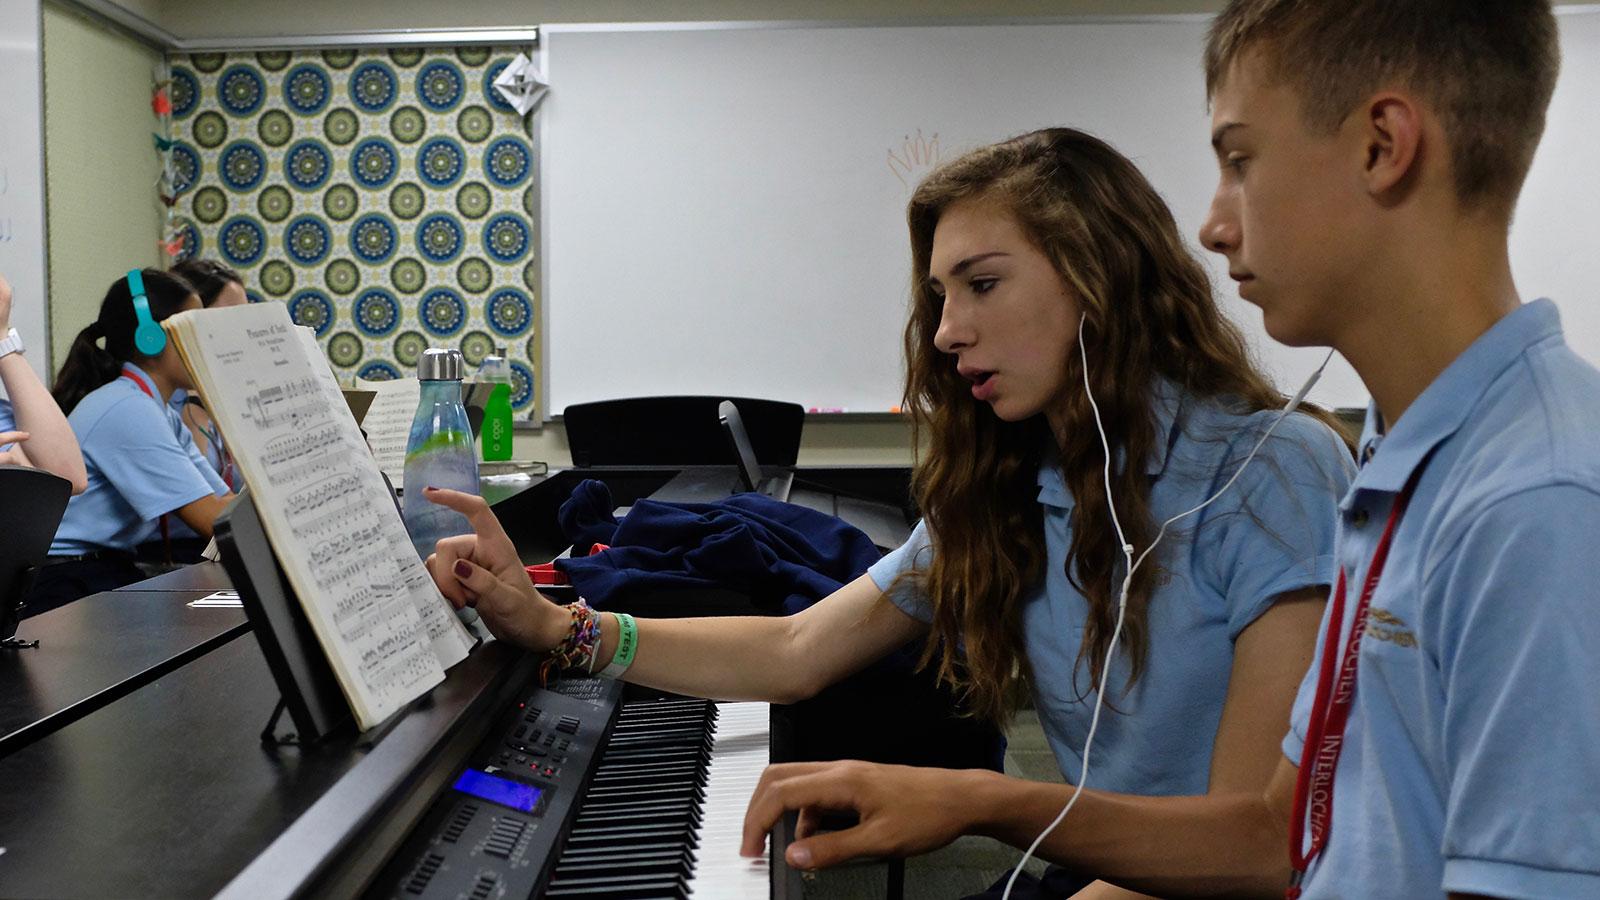 A girl and boy at an electric piano